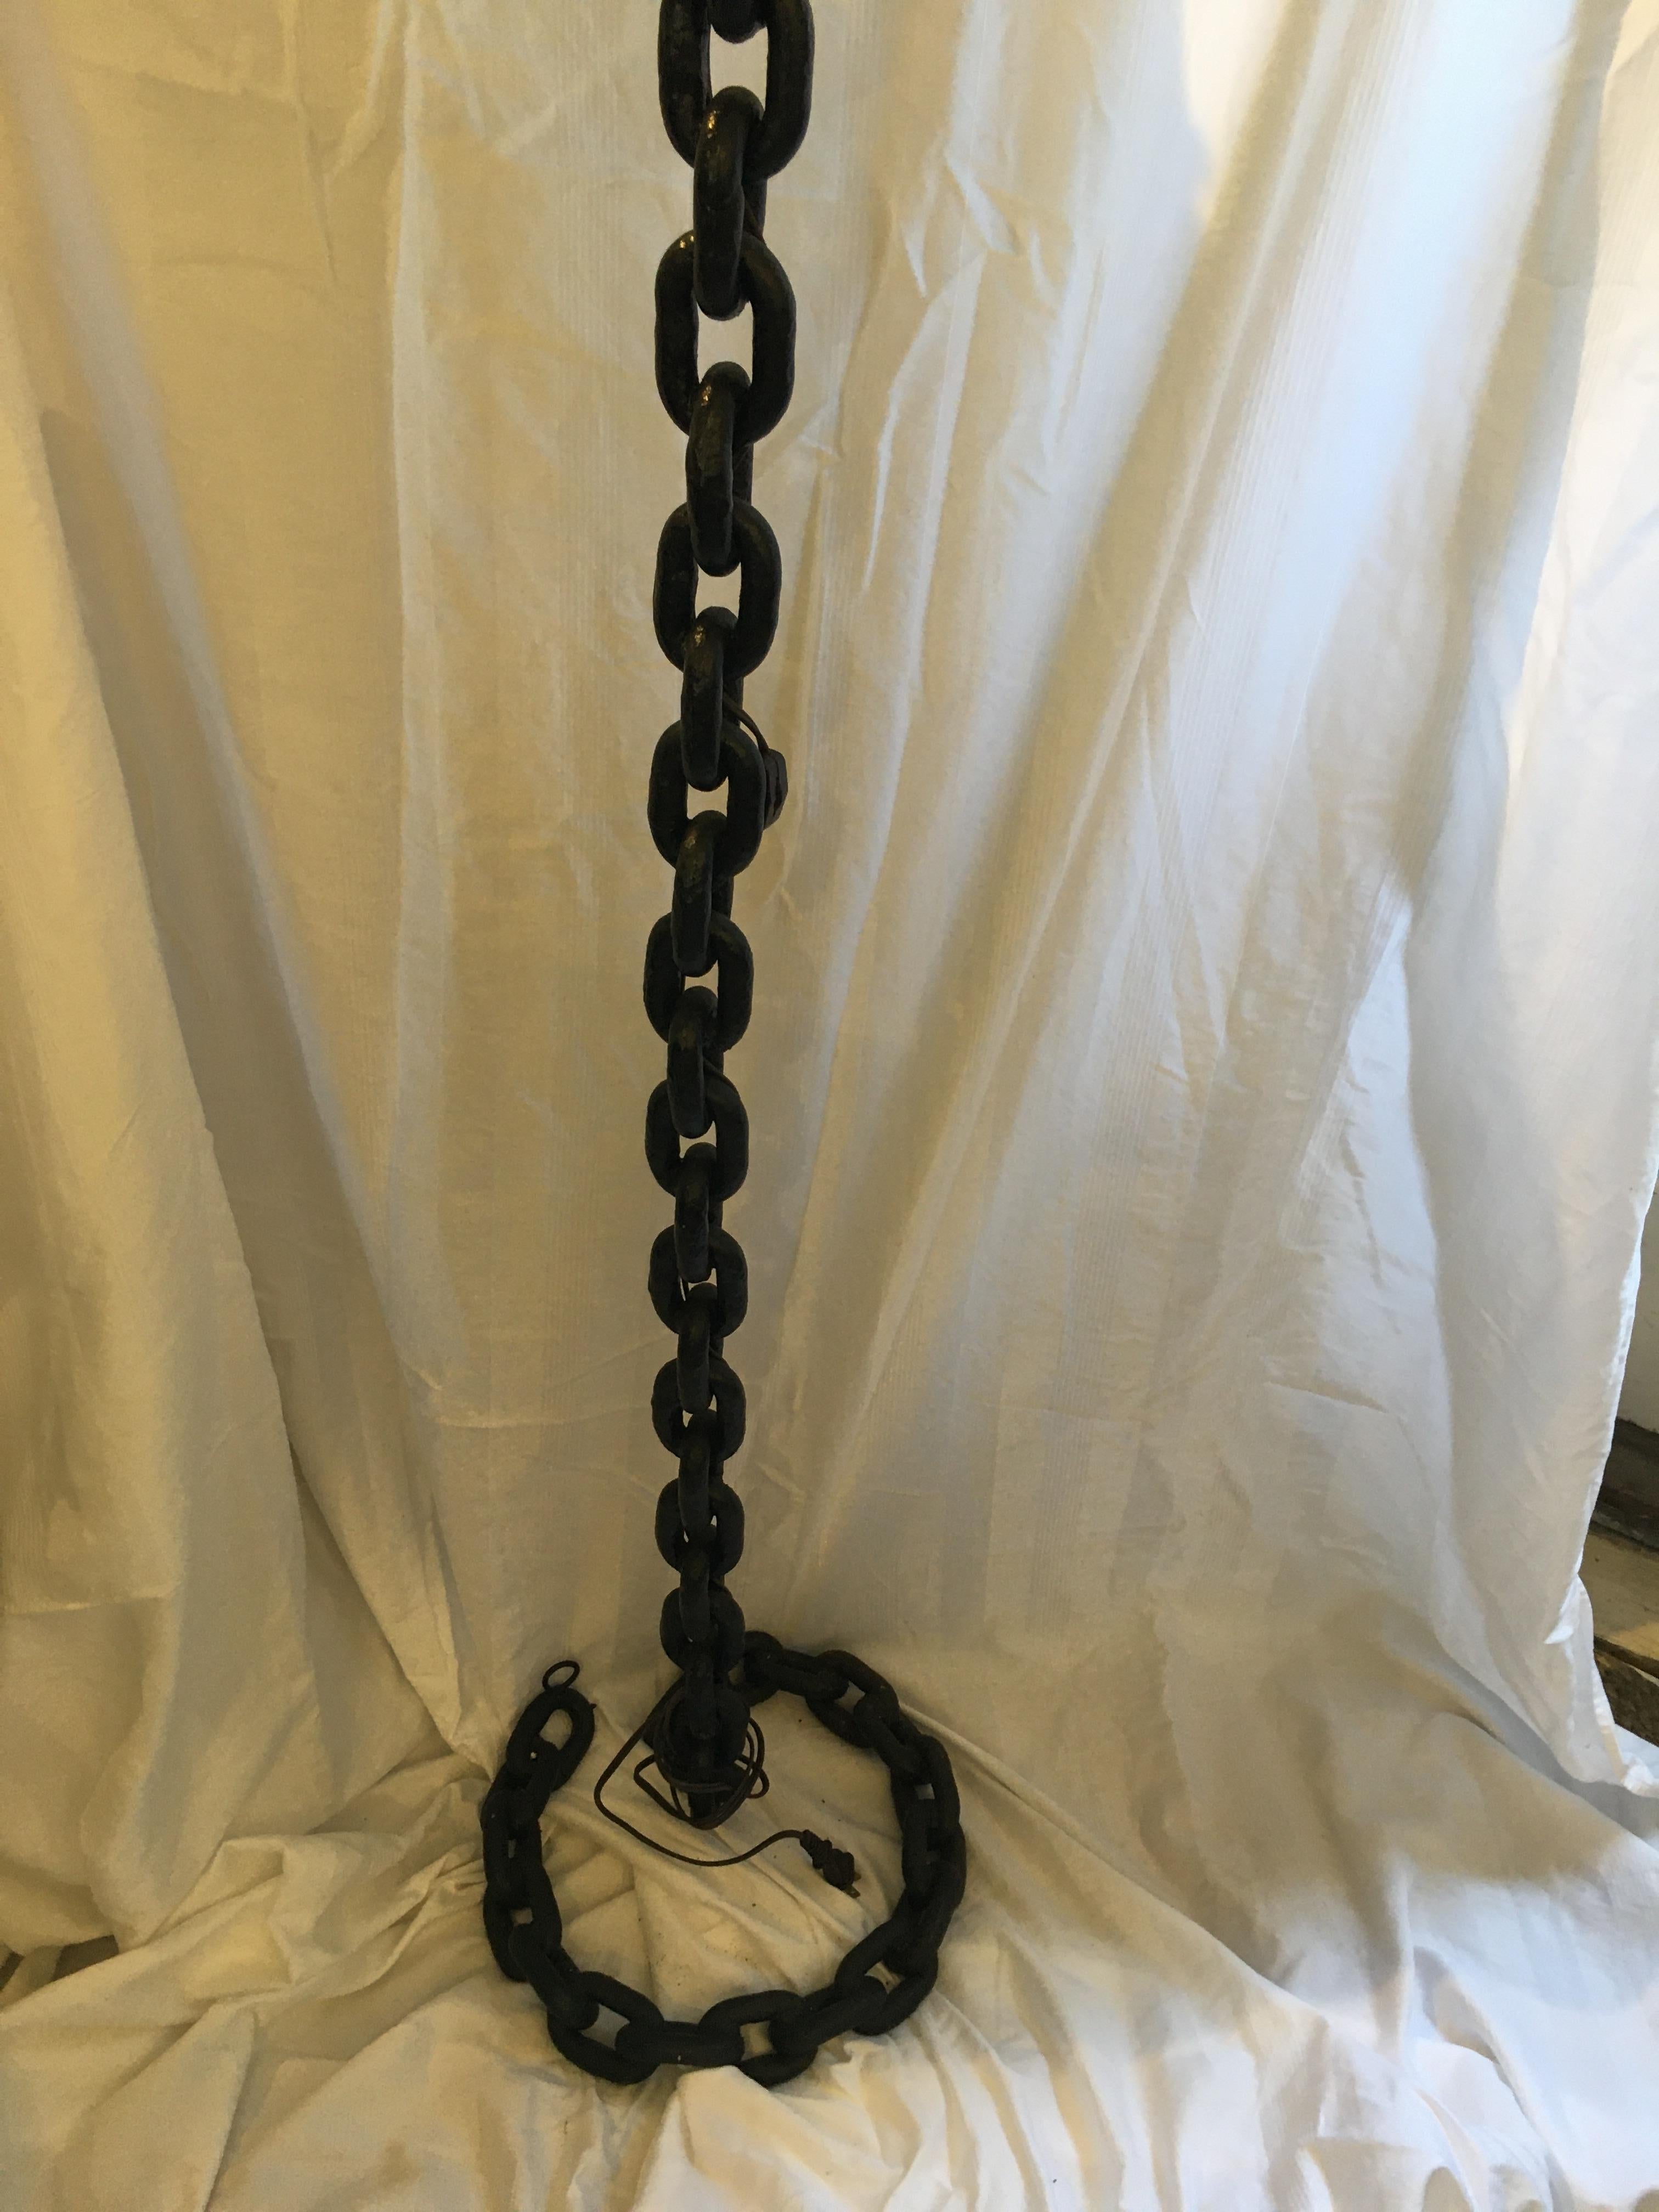 Repurposed ship’s 2” x 3” iron chain soldered to create the floor lamp and coiled into a circular base. Electrified for American use and takes one standard base light bulb and has a brass 9” harp for a spider lamp shade. (Not included).